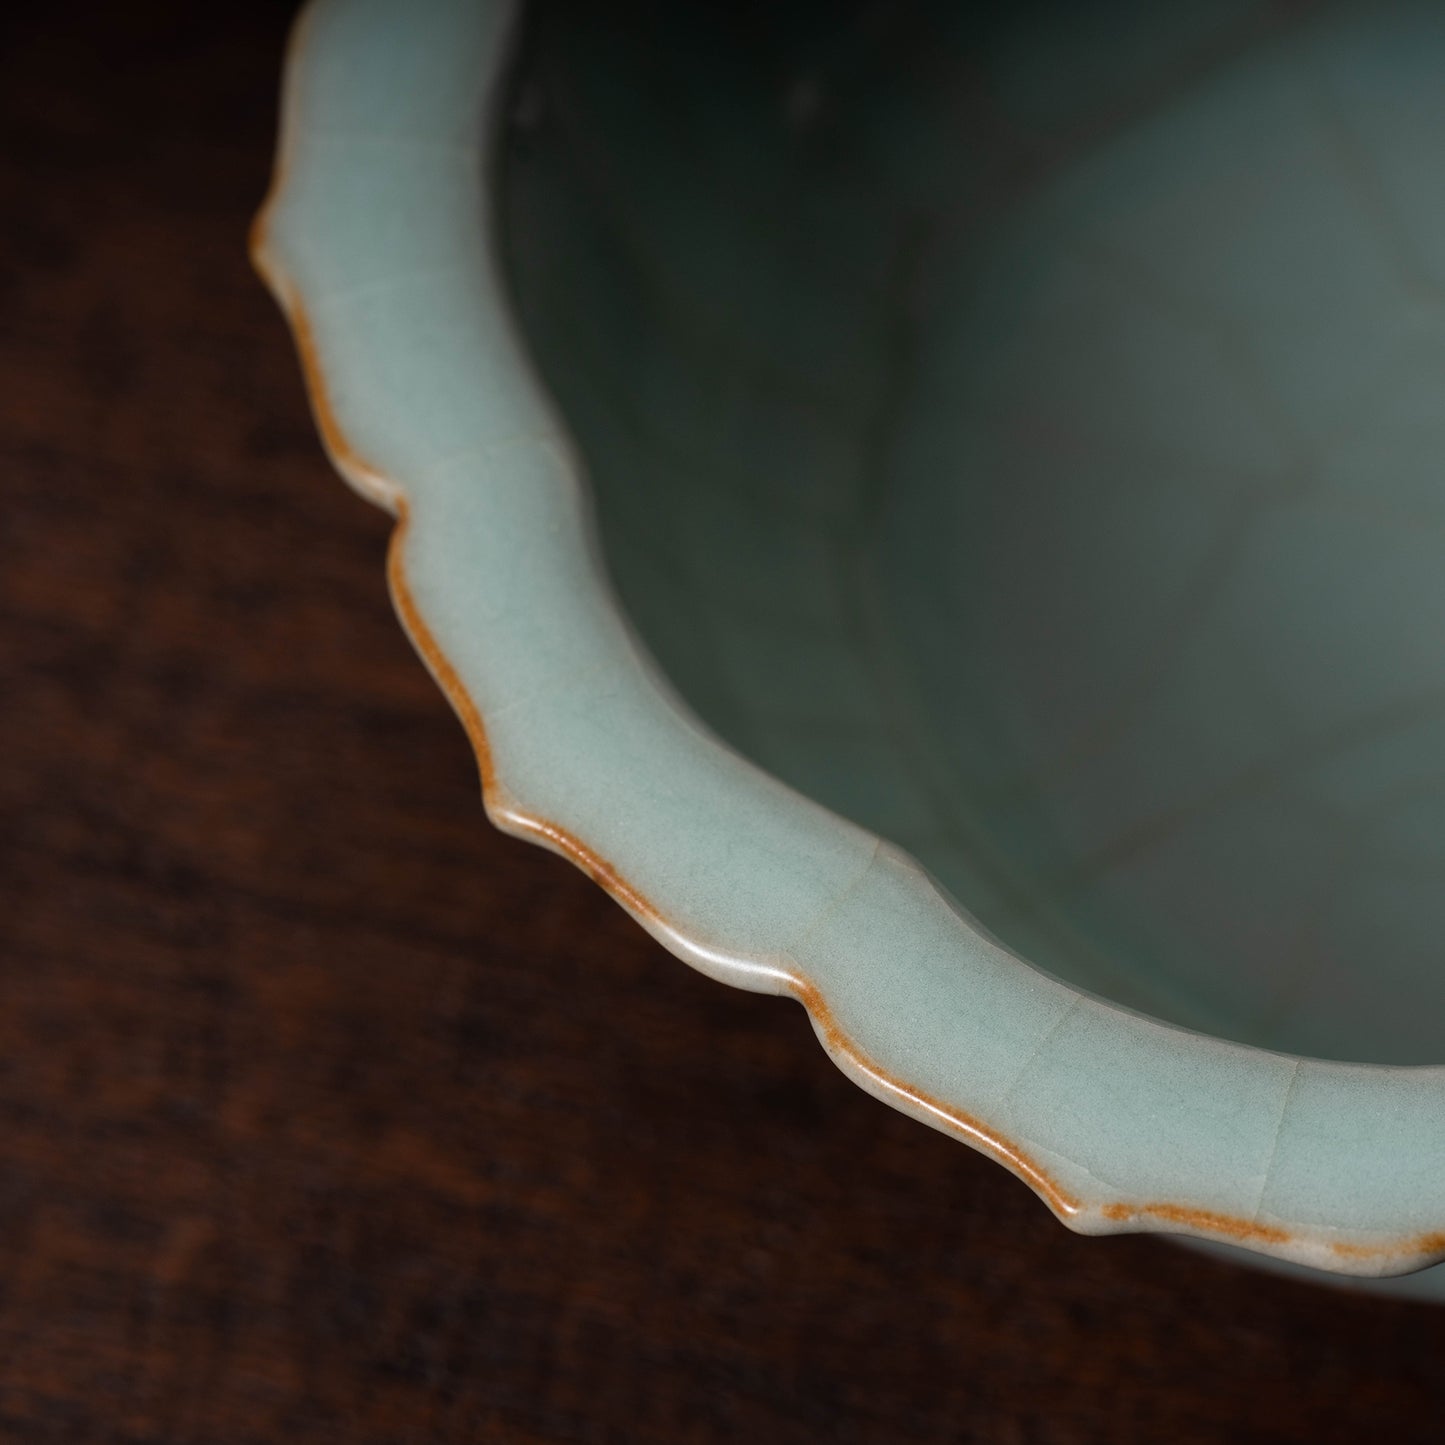 Southern Song Dynasty Celadon Teabowl with Flower Edge Design